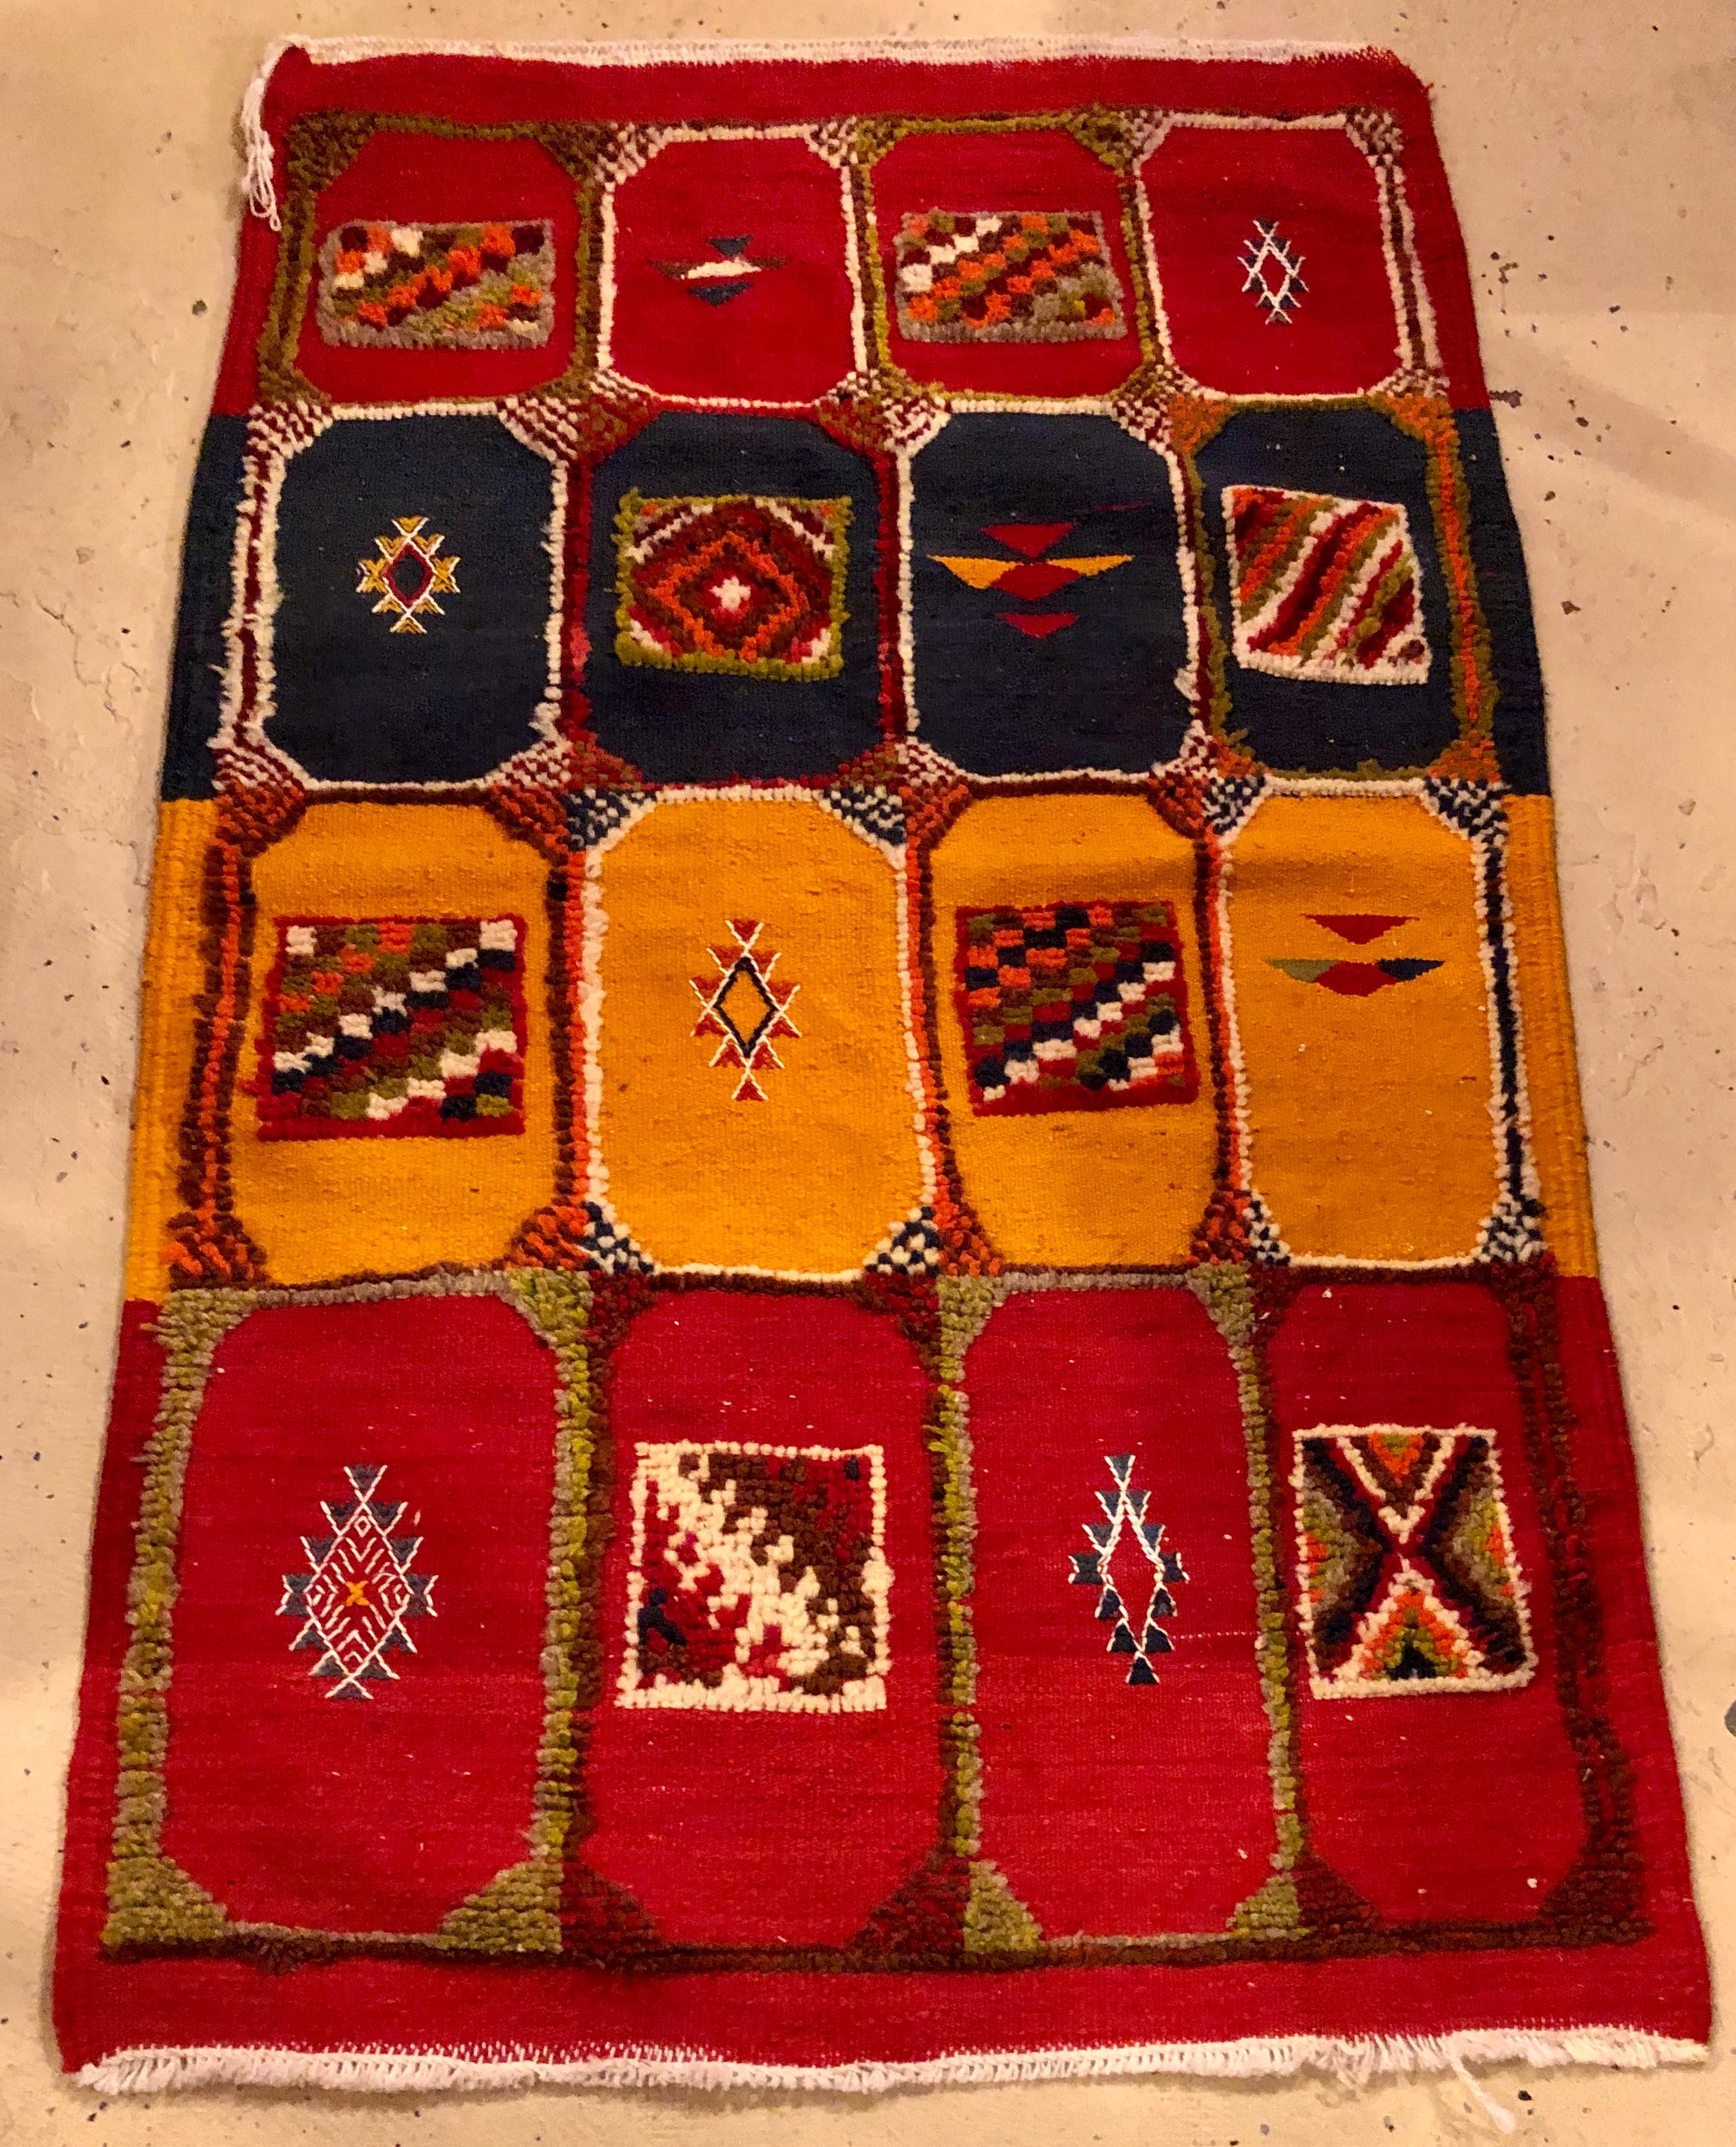 A stunning vintage Moroccan tribal berber rug handwoven of sheep wool in deep and vivid all-natural vegetable dyes. The rug features wonderfully absorbing geometric and abstract patterns alternate with Berber designs elements within a series of